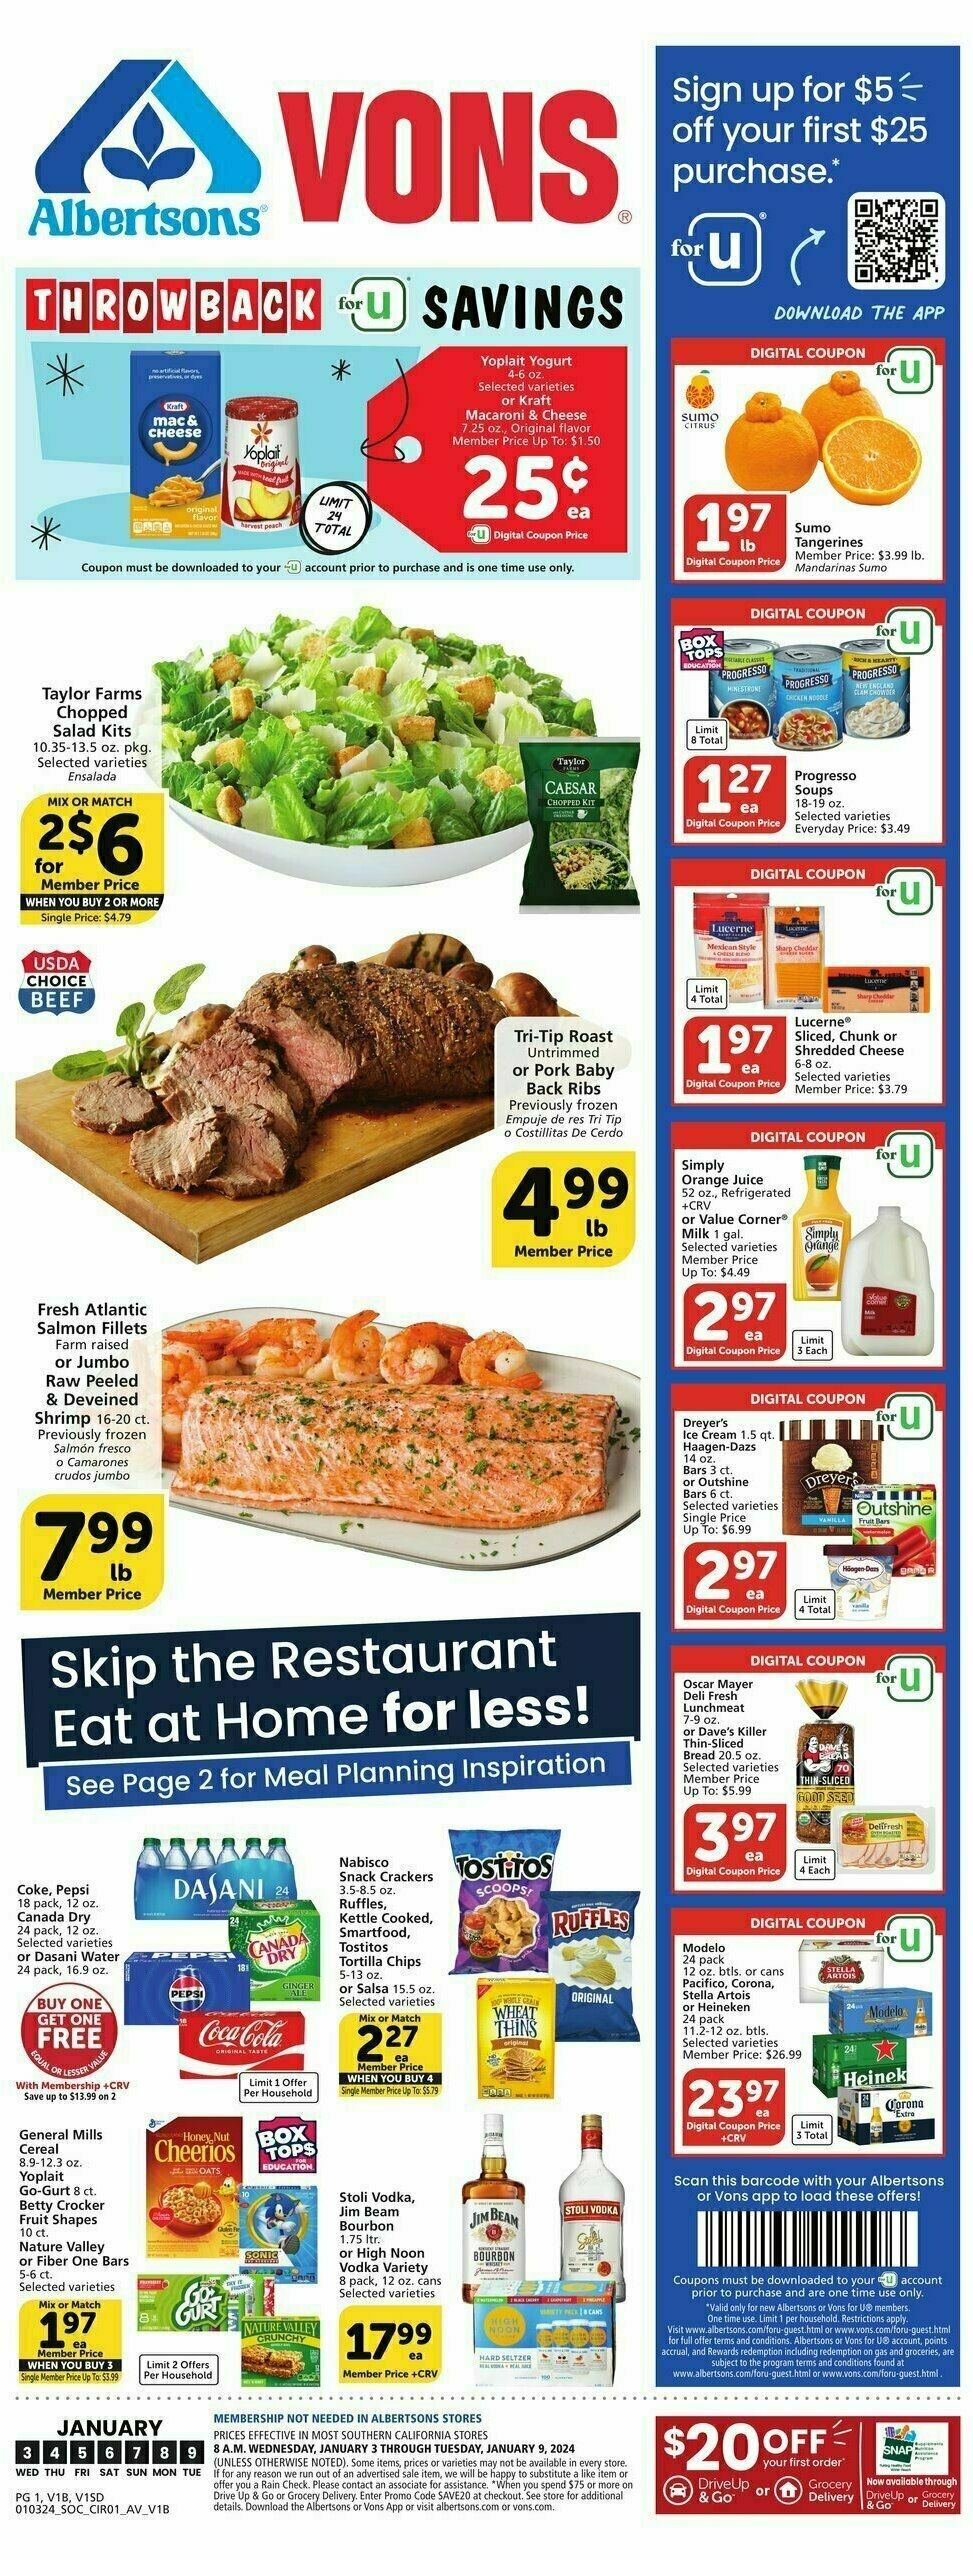 Vons Weekly Ad from January 3